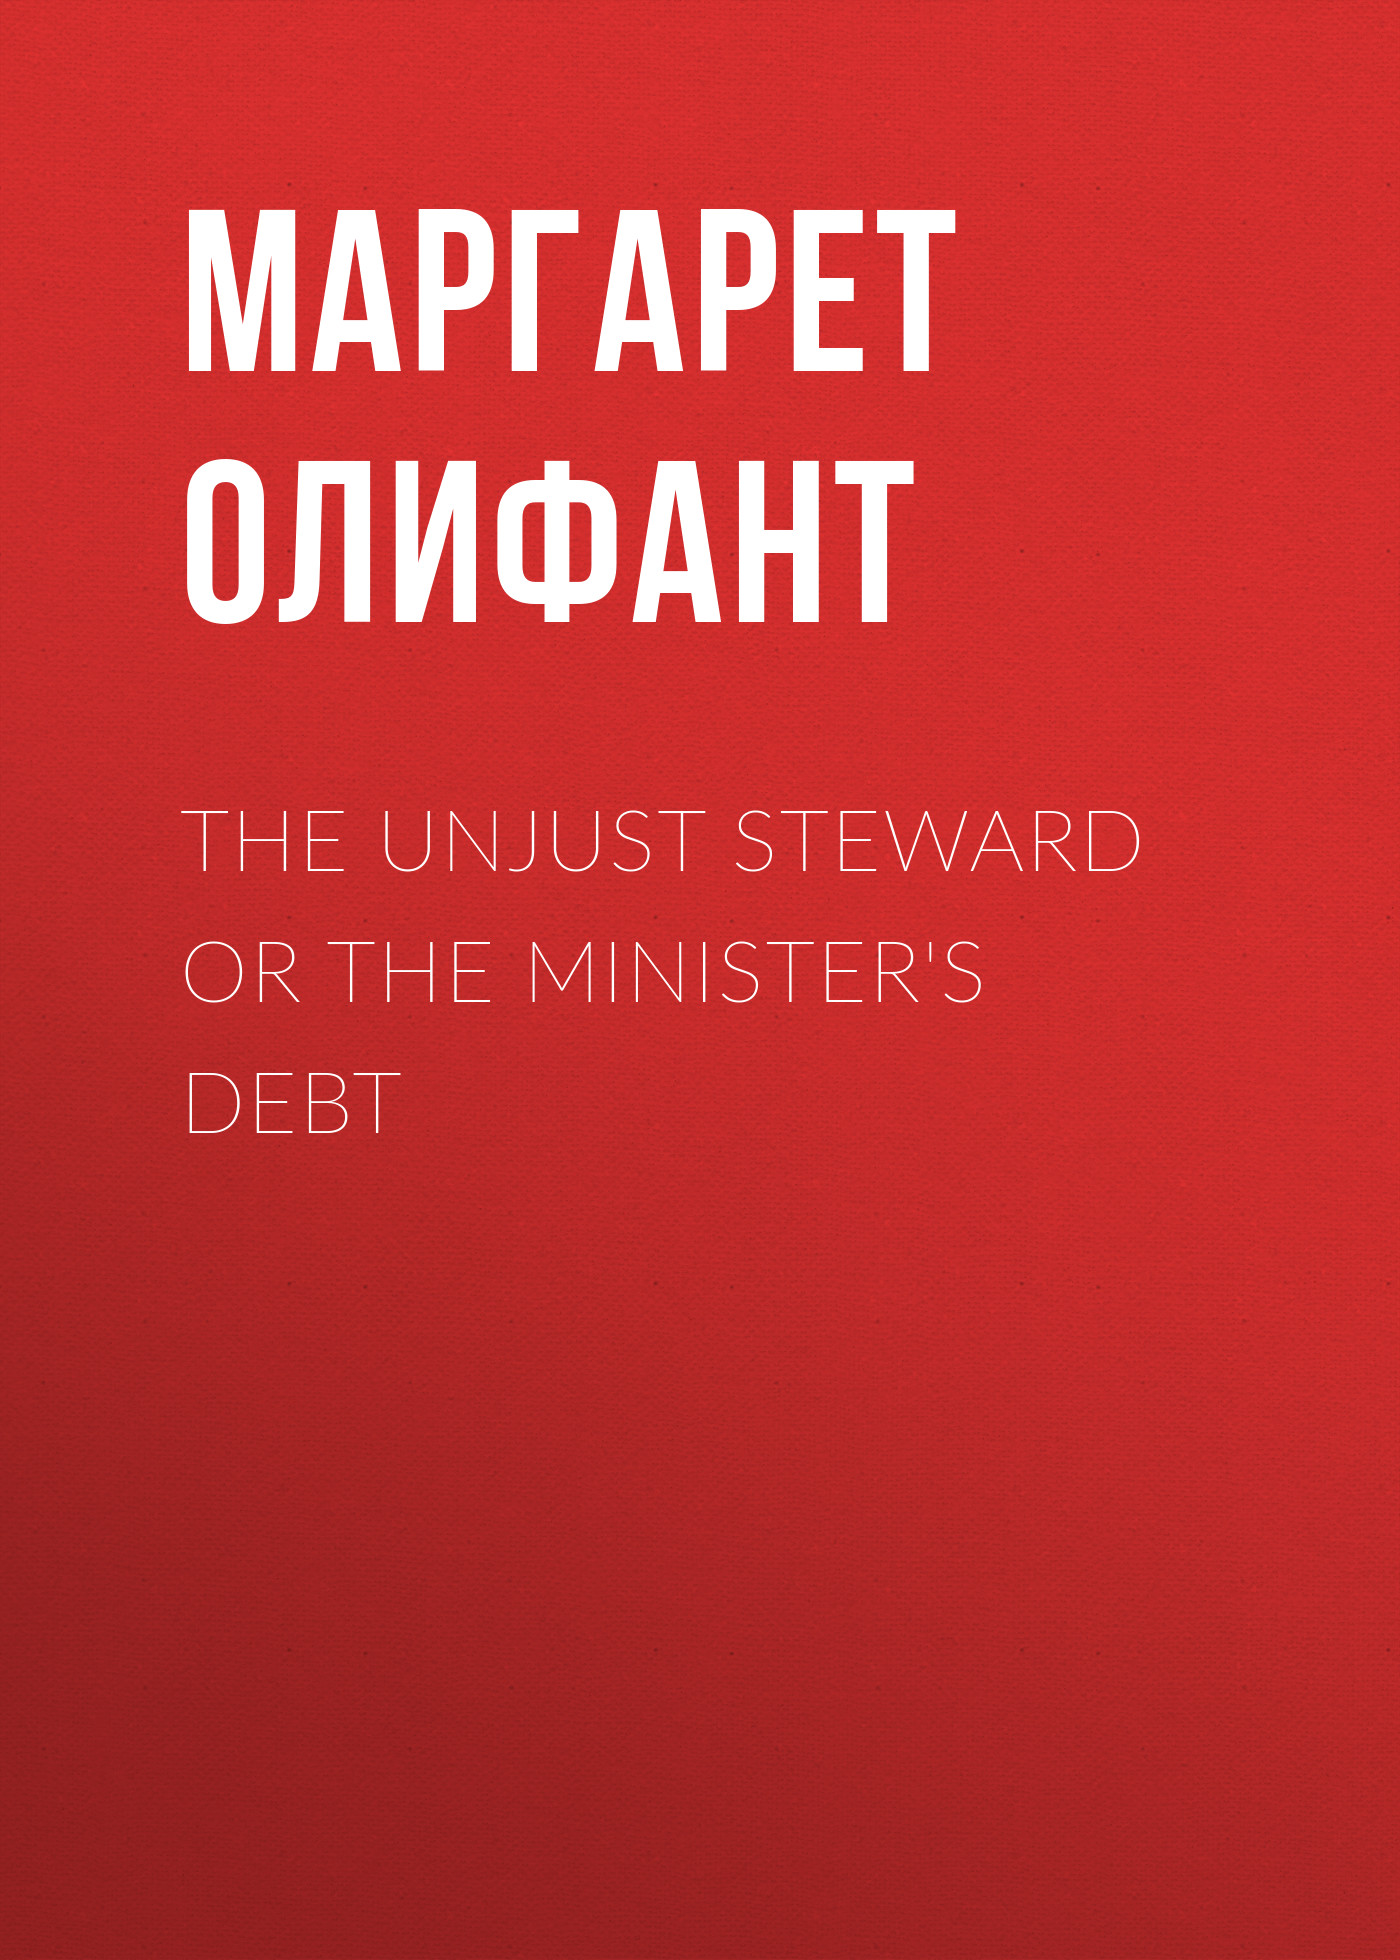 The Unjust Steward or The Minister's Debt